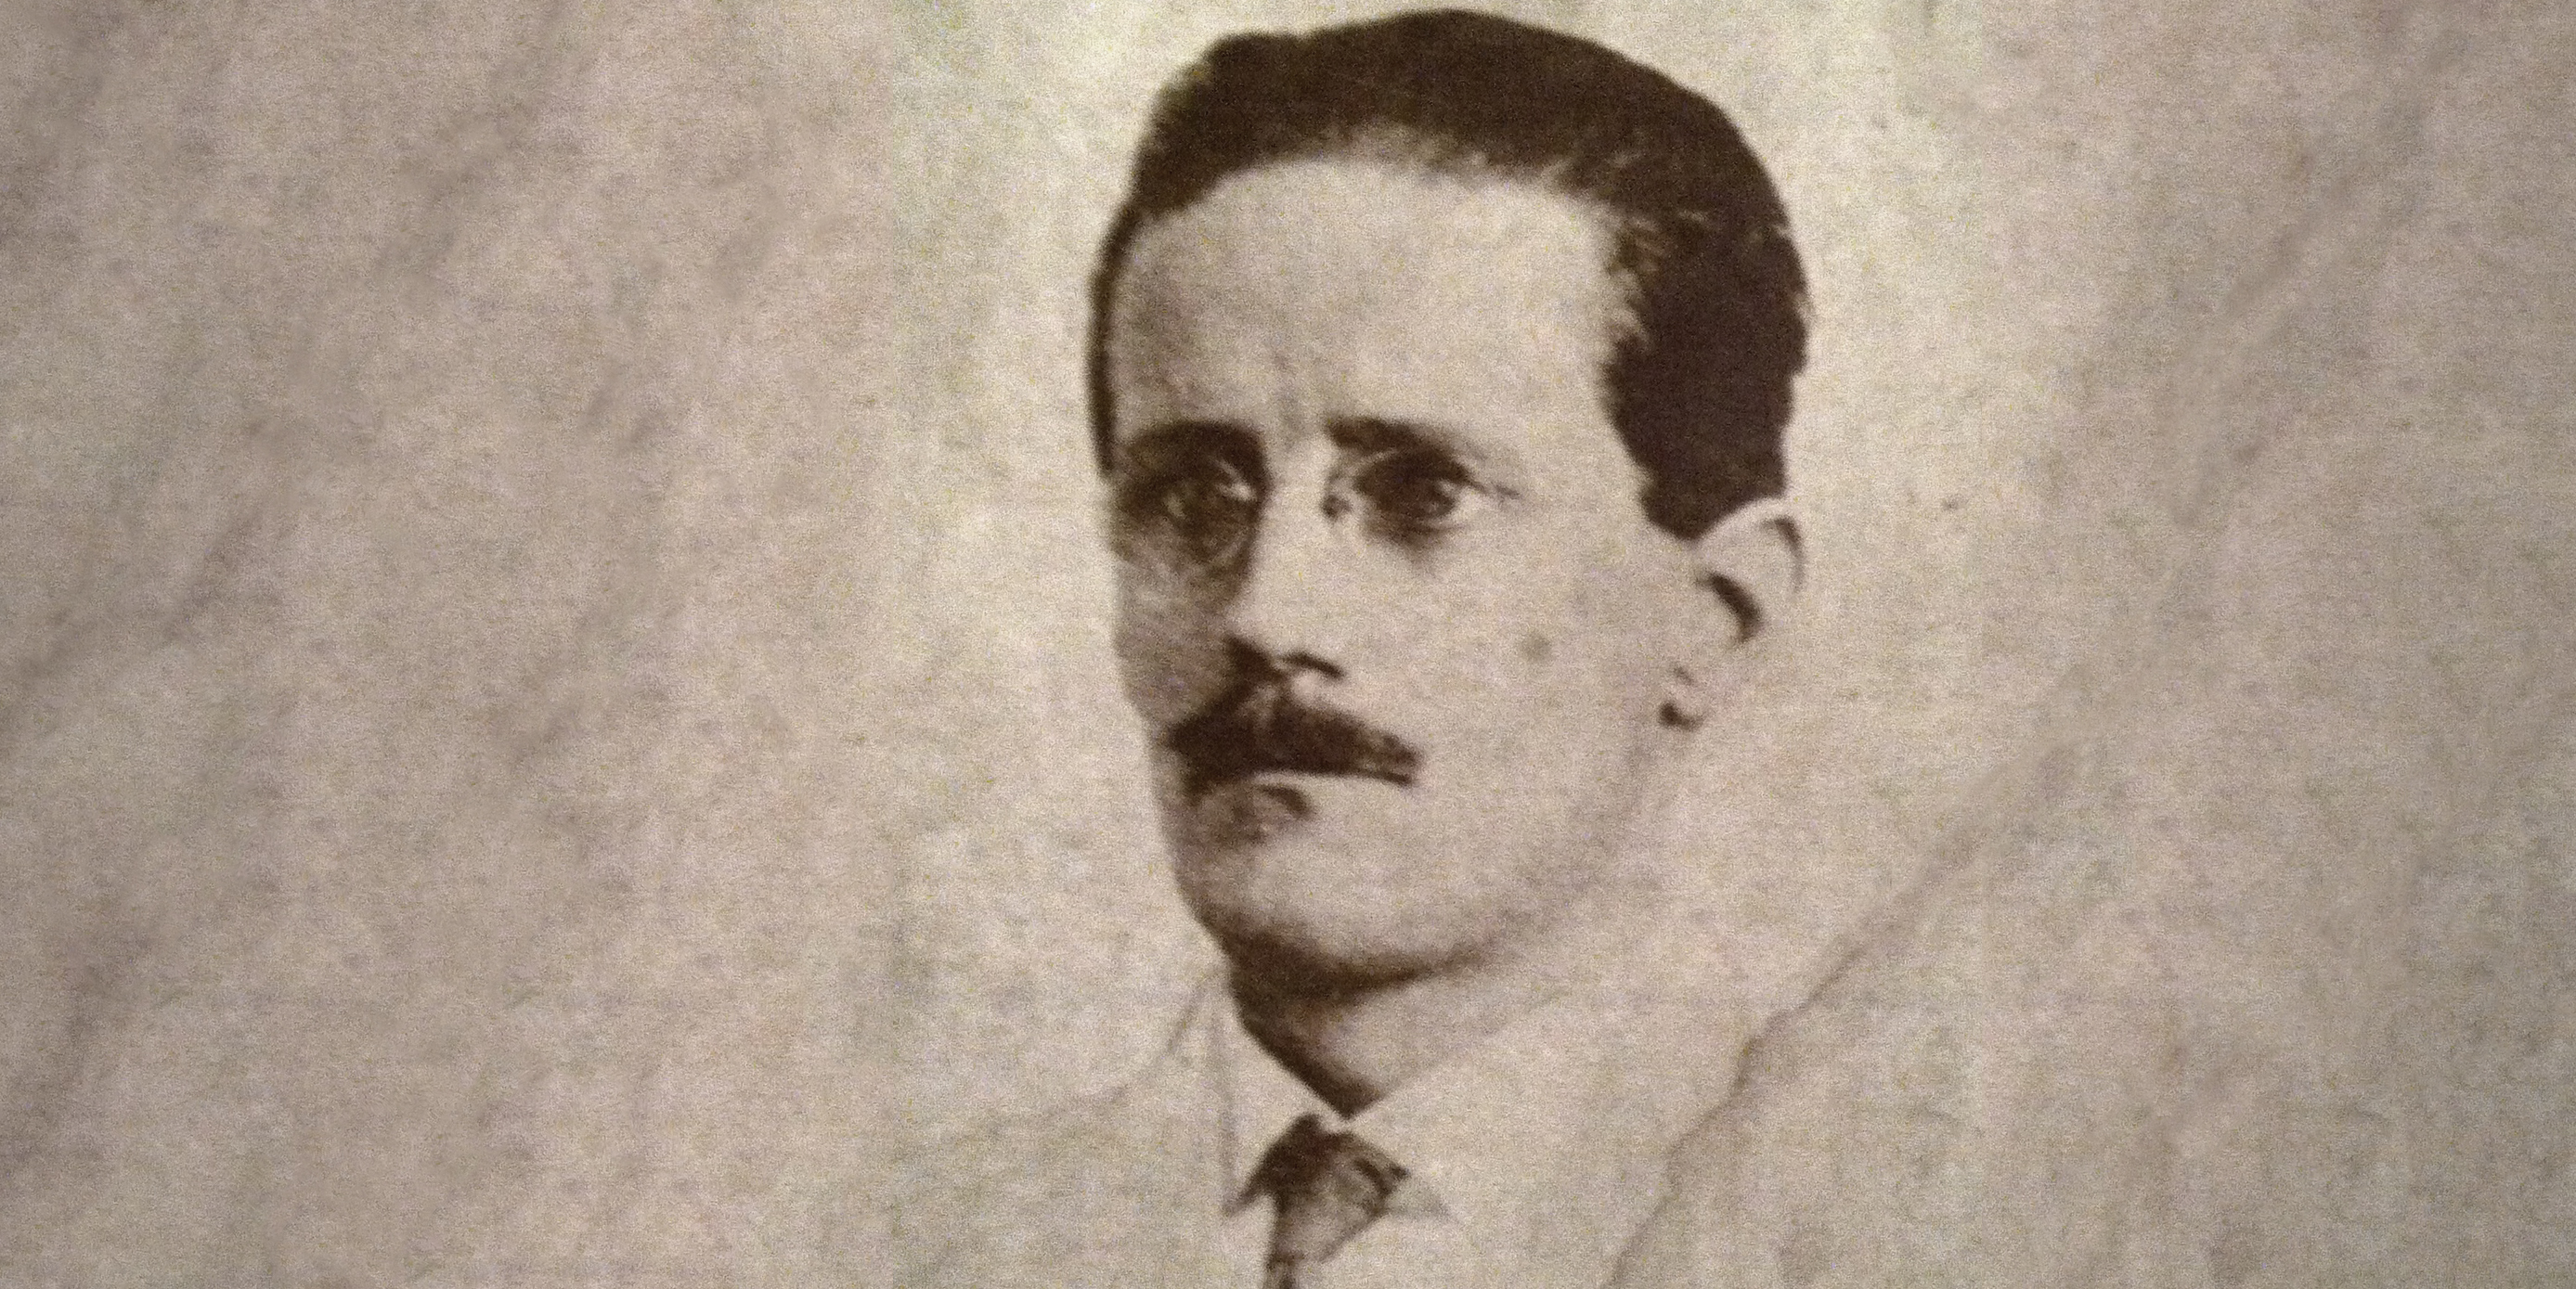 James Joyce agus an Ghaeilge: ‘You are an Irishman and you must write in your own tradition’